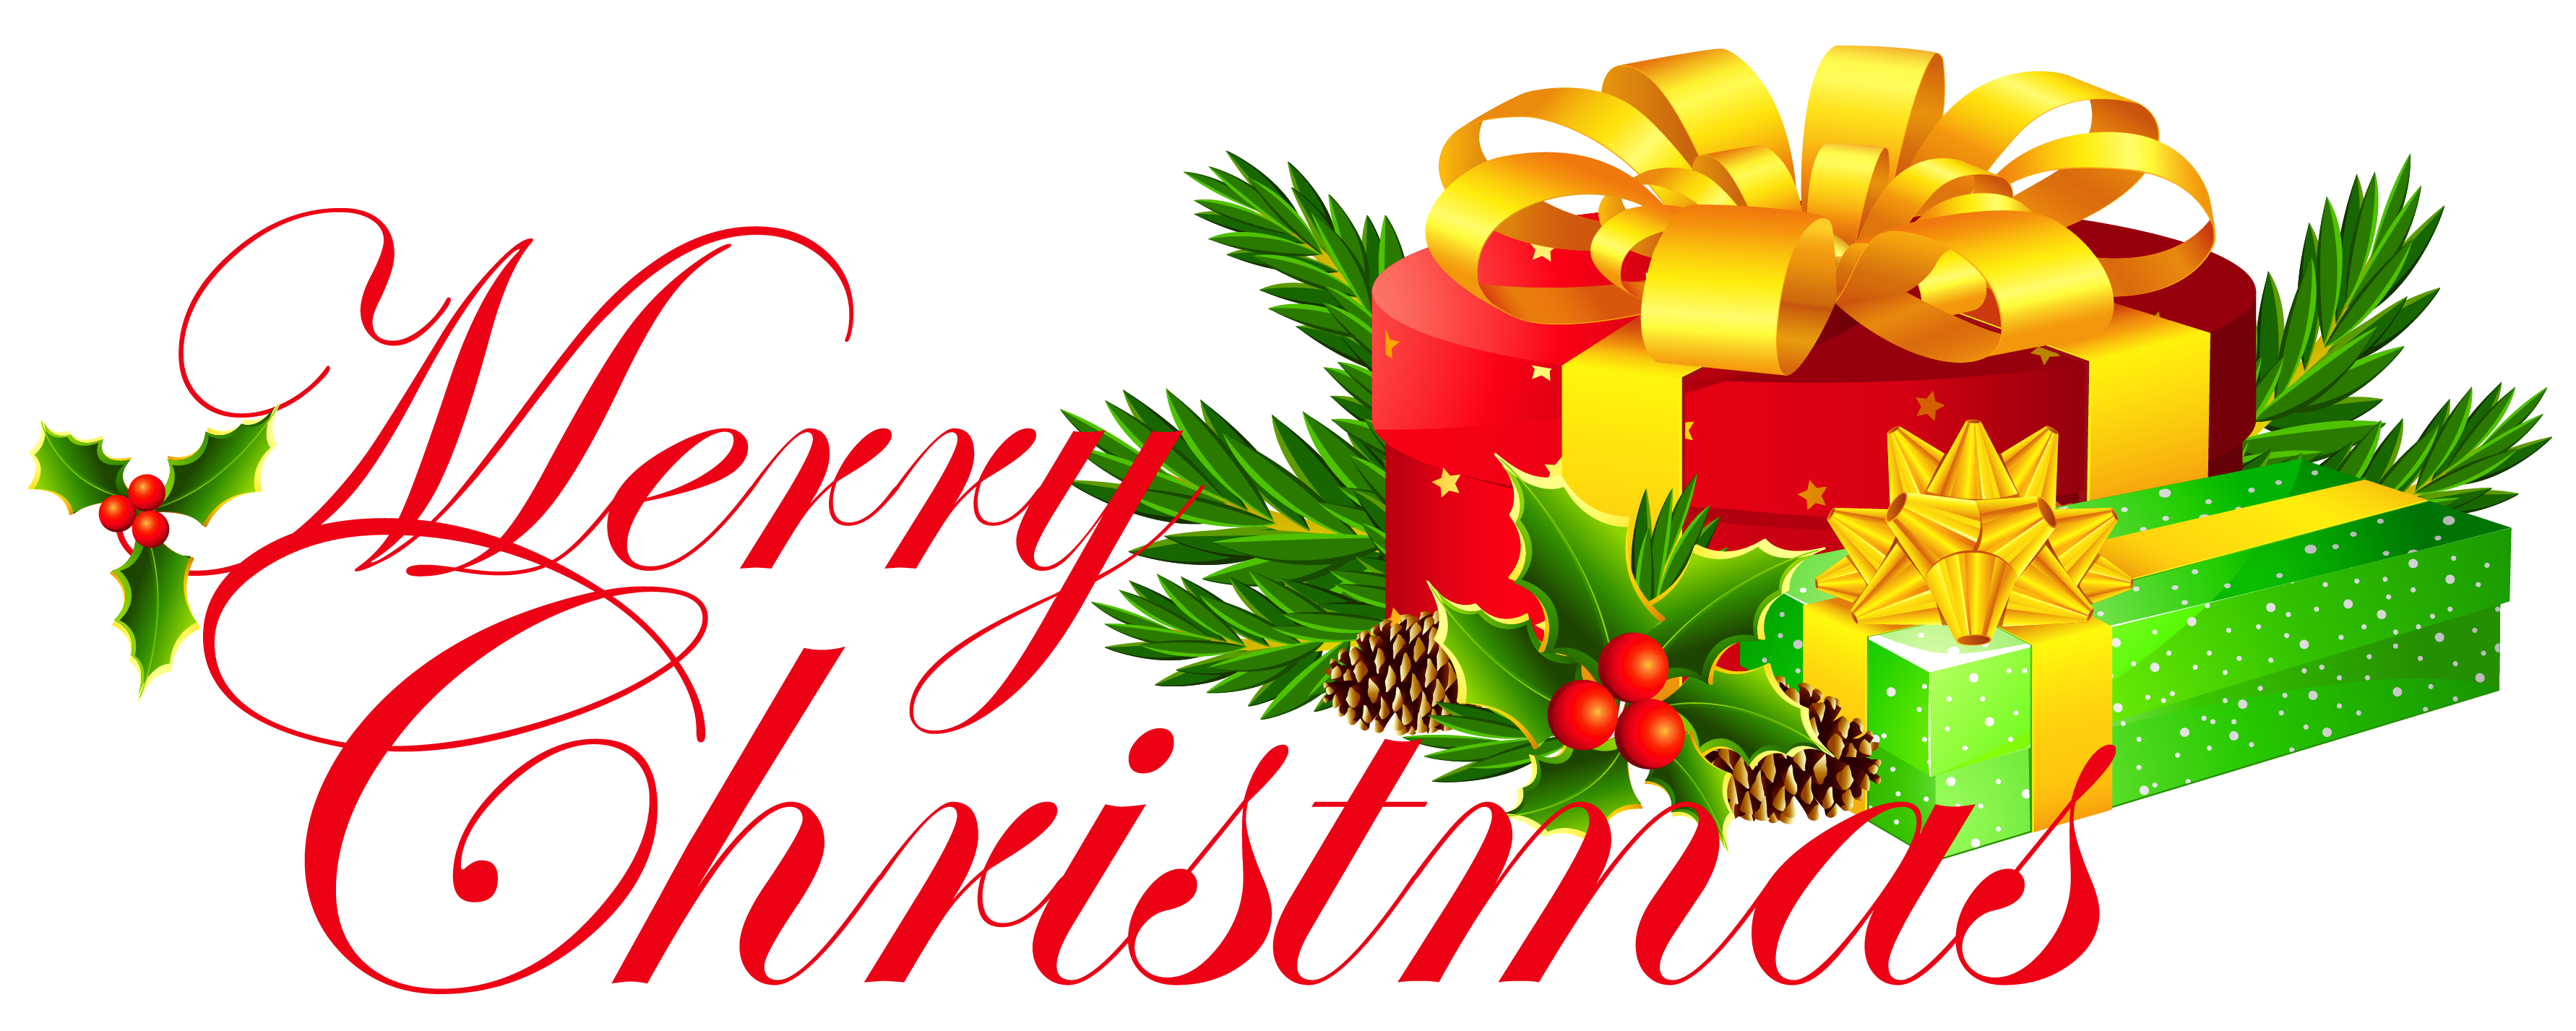 free-merry-christmas-cliparts-download-free-merry-christmas-cliparts-png-images-free-cliparts